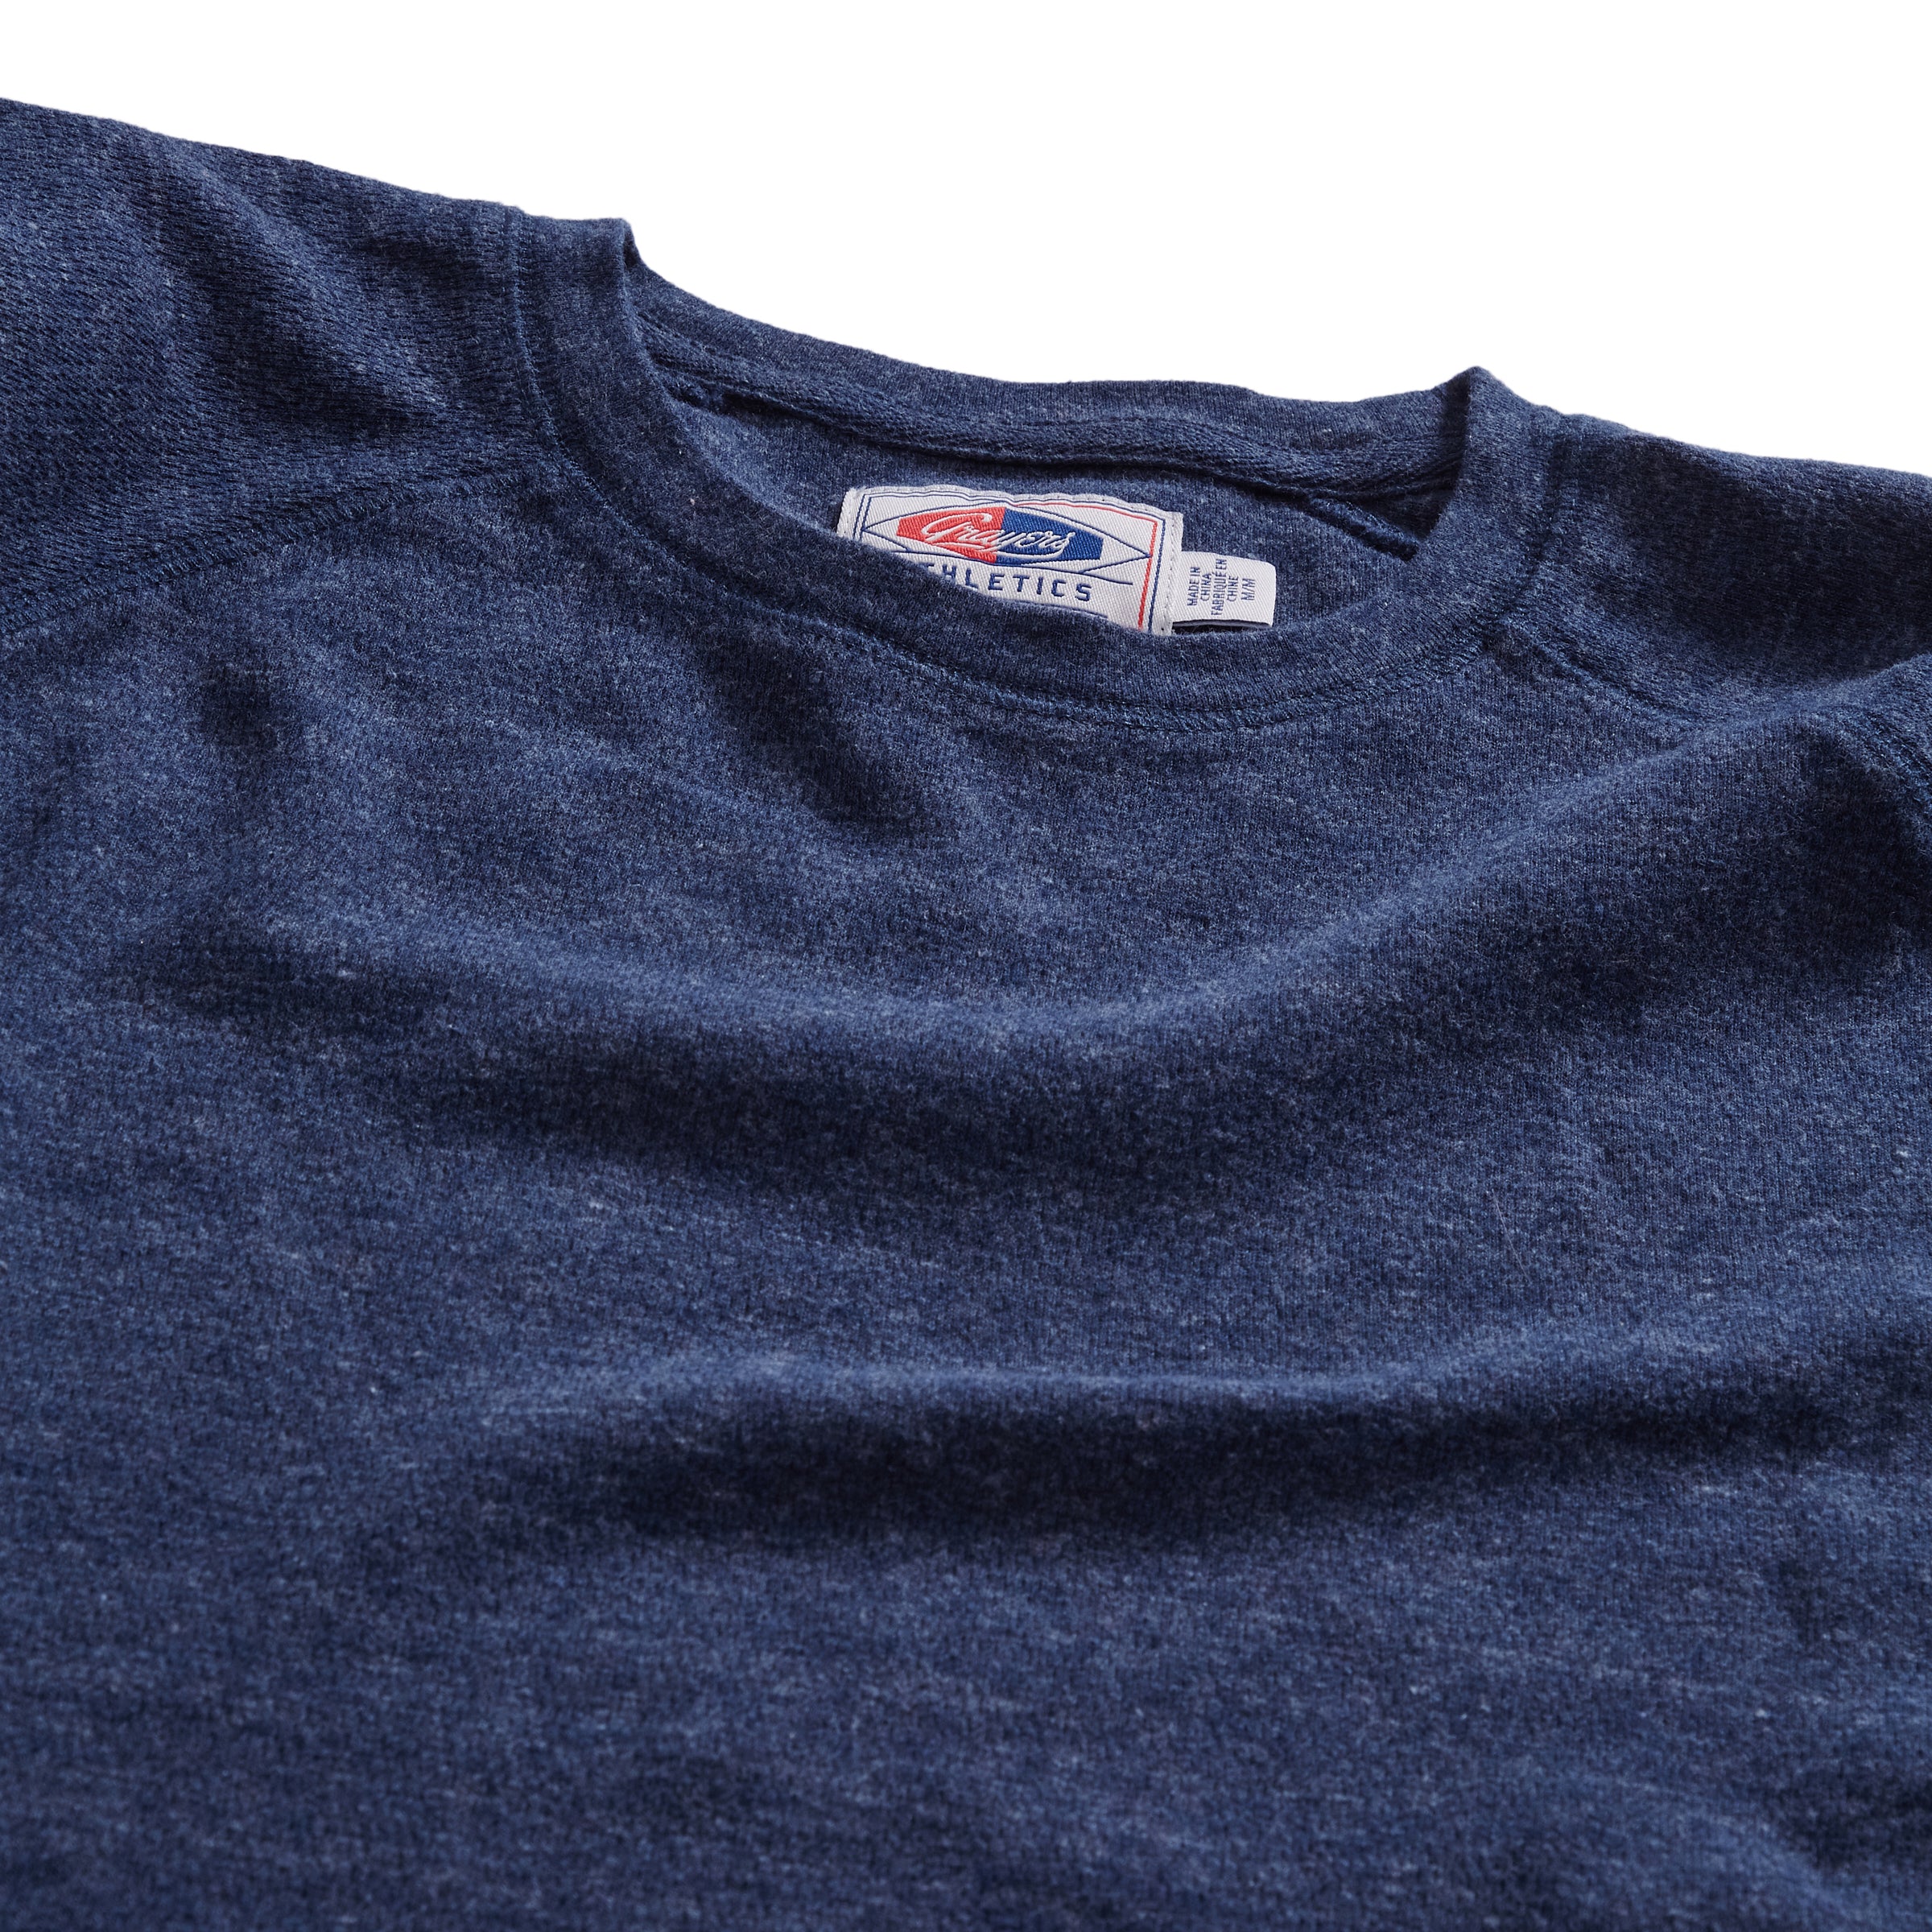 Fairmile Athletic Thermal Crew - Navy Heather